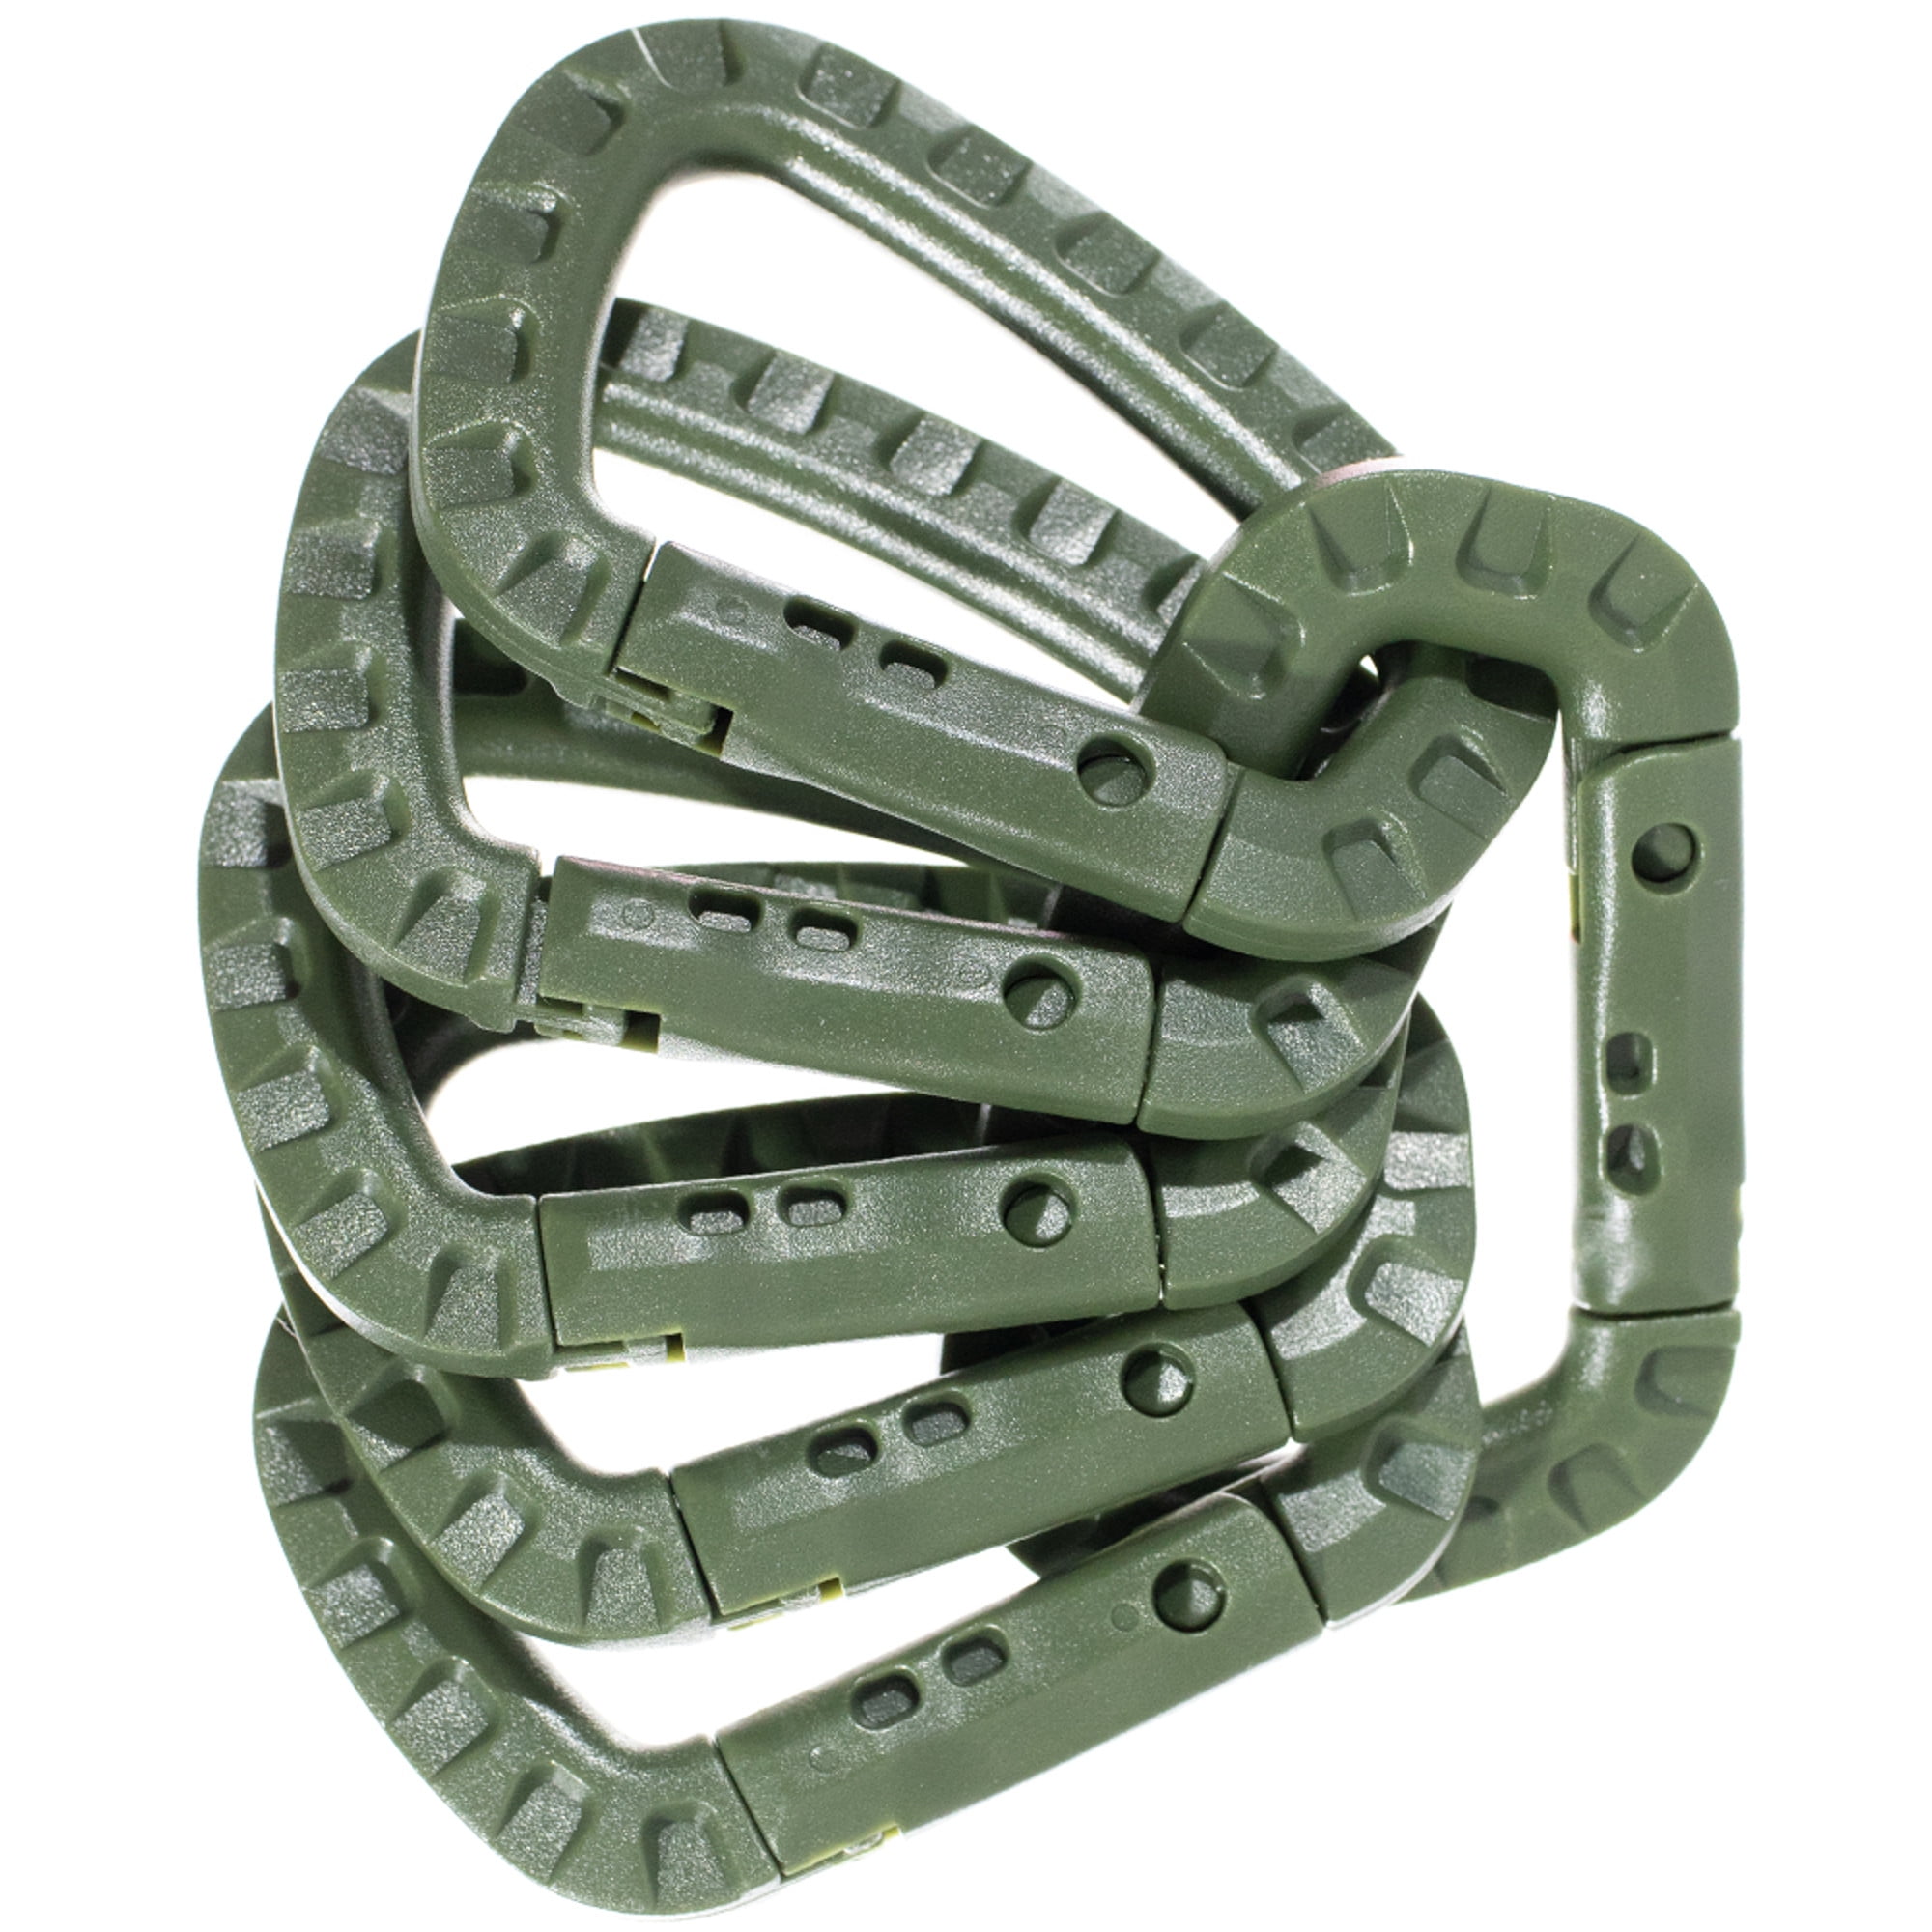 6x Strong Plastic Outdoor Carabiners Tactical Straight D-Ring Key Chain Clip 